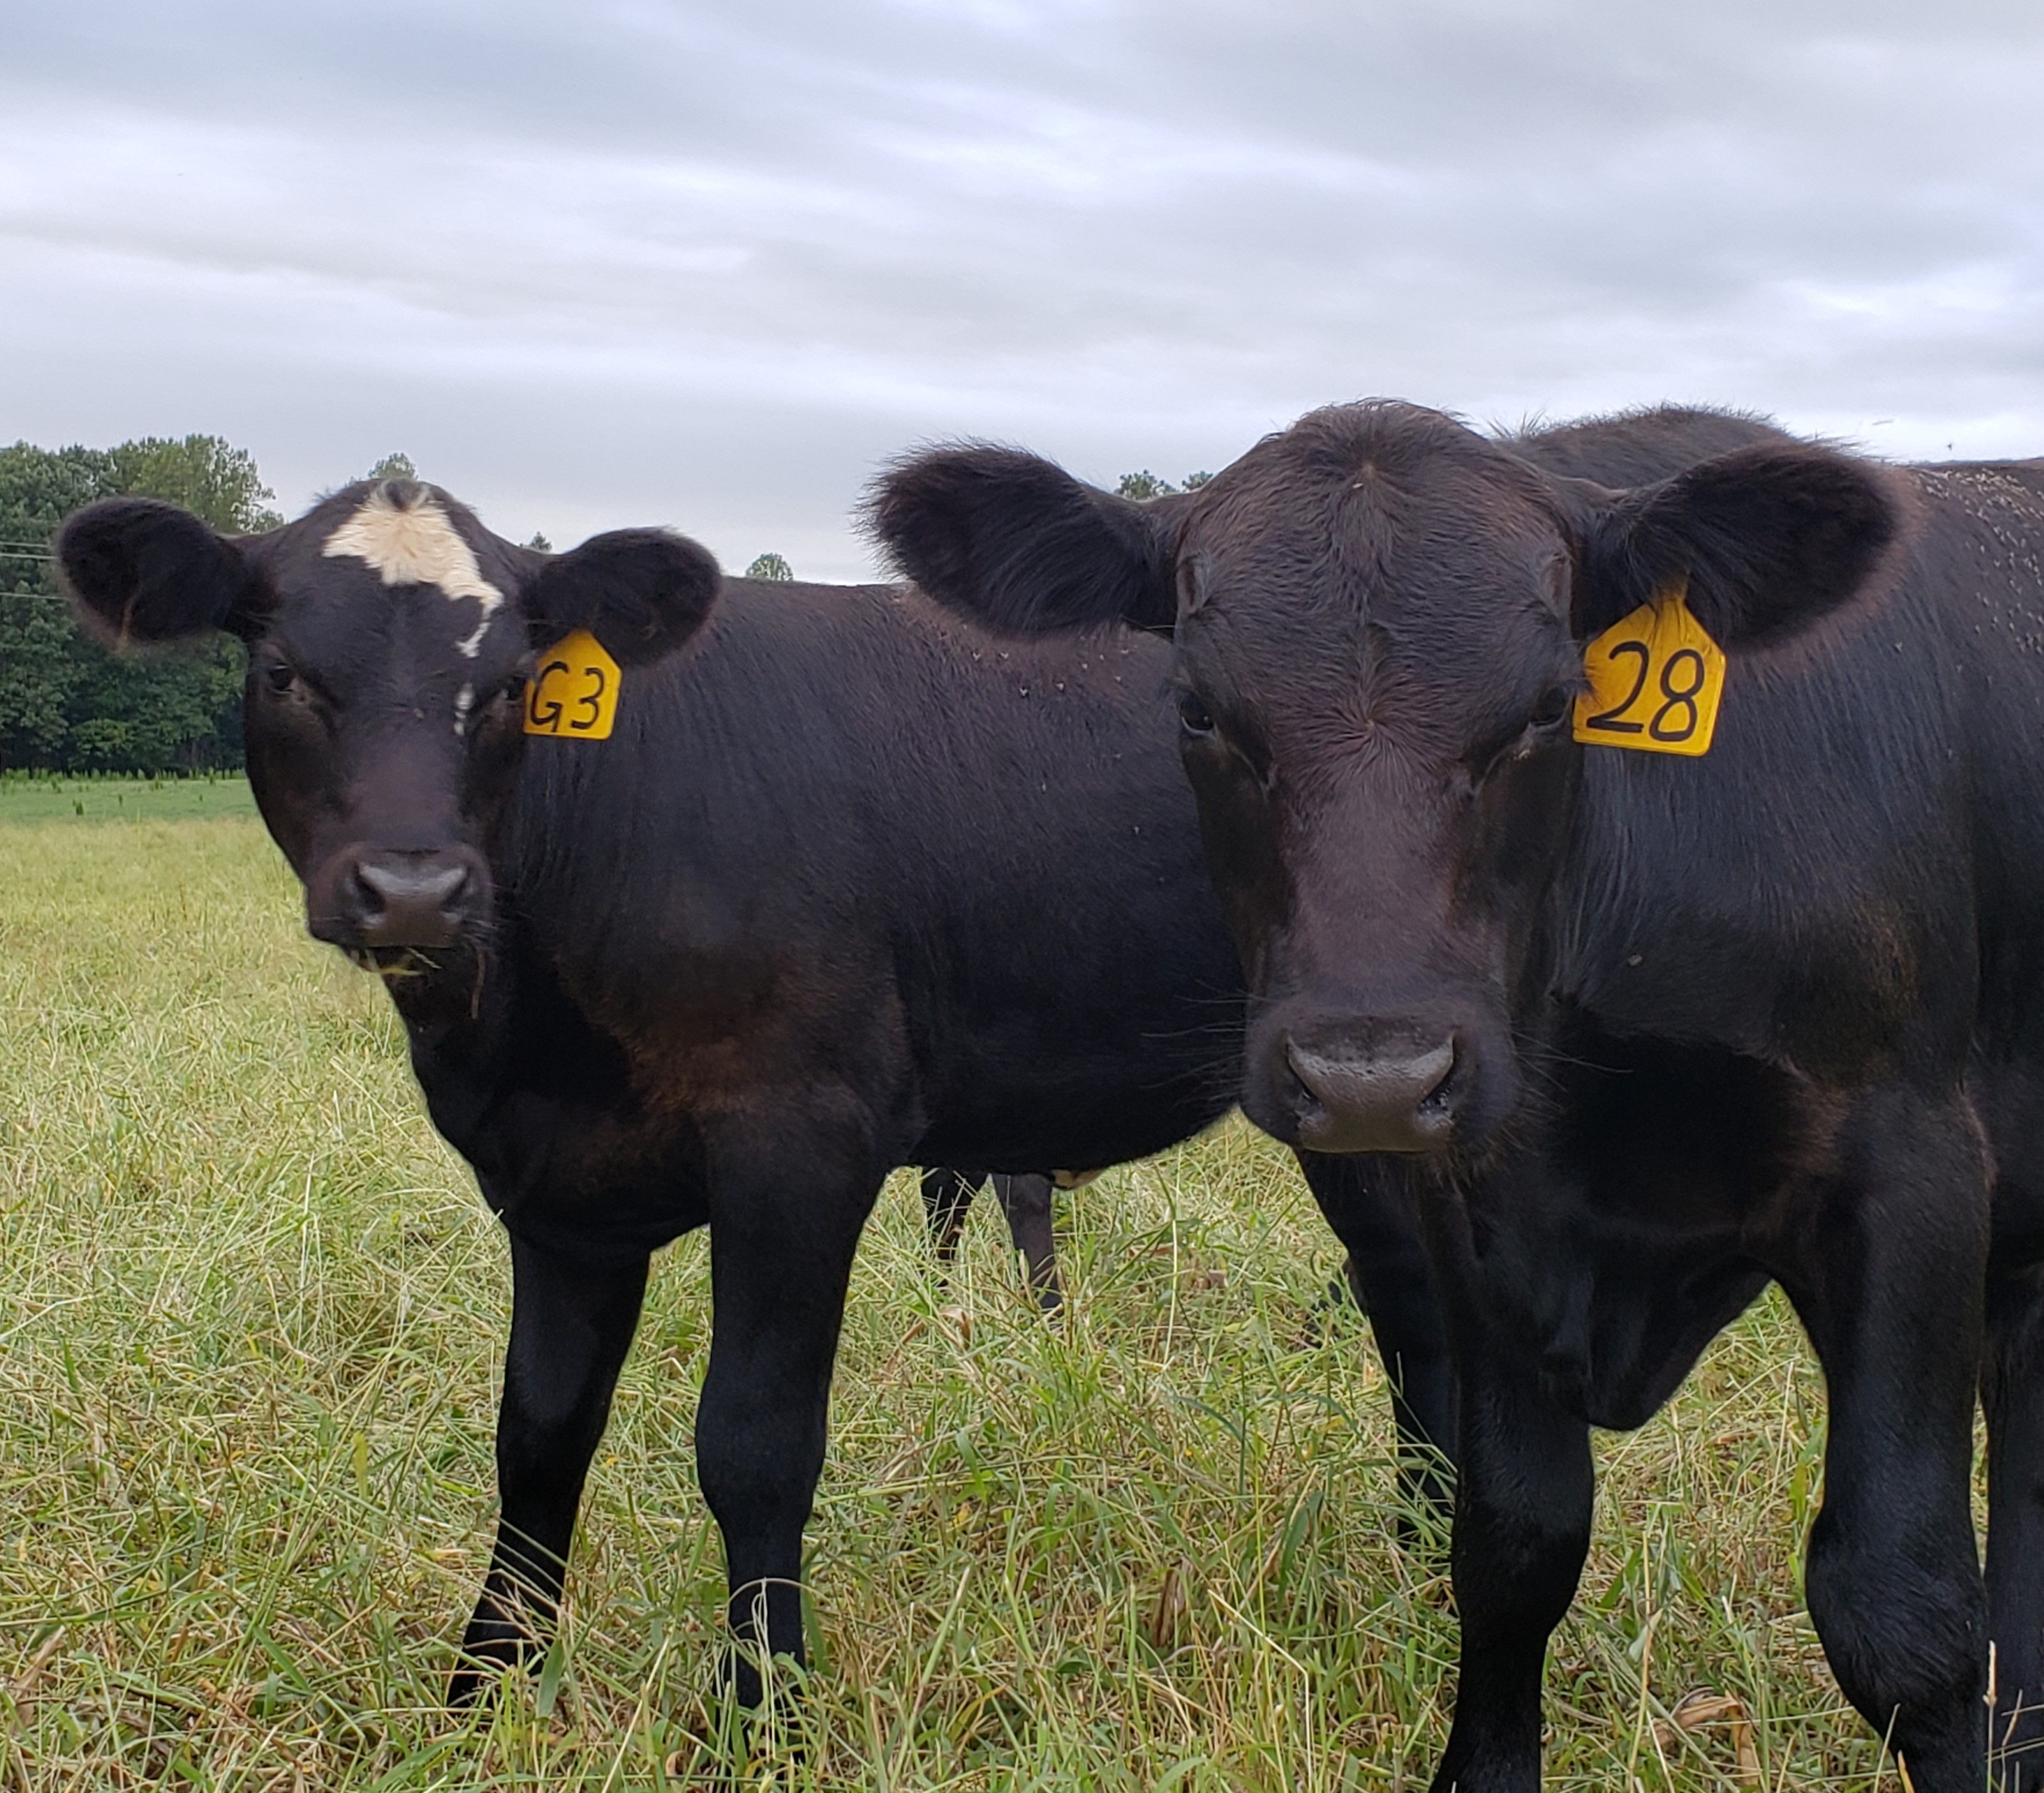 Black calves with yellow ear tags standing in pasture.